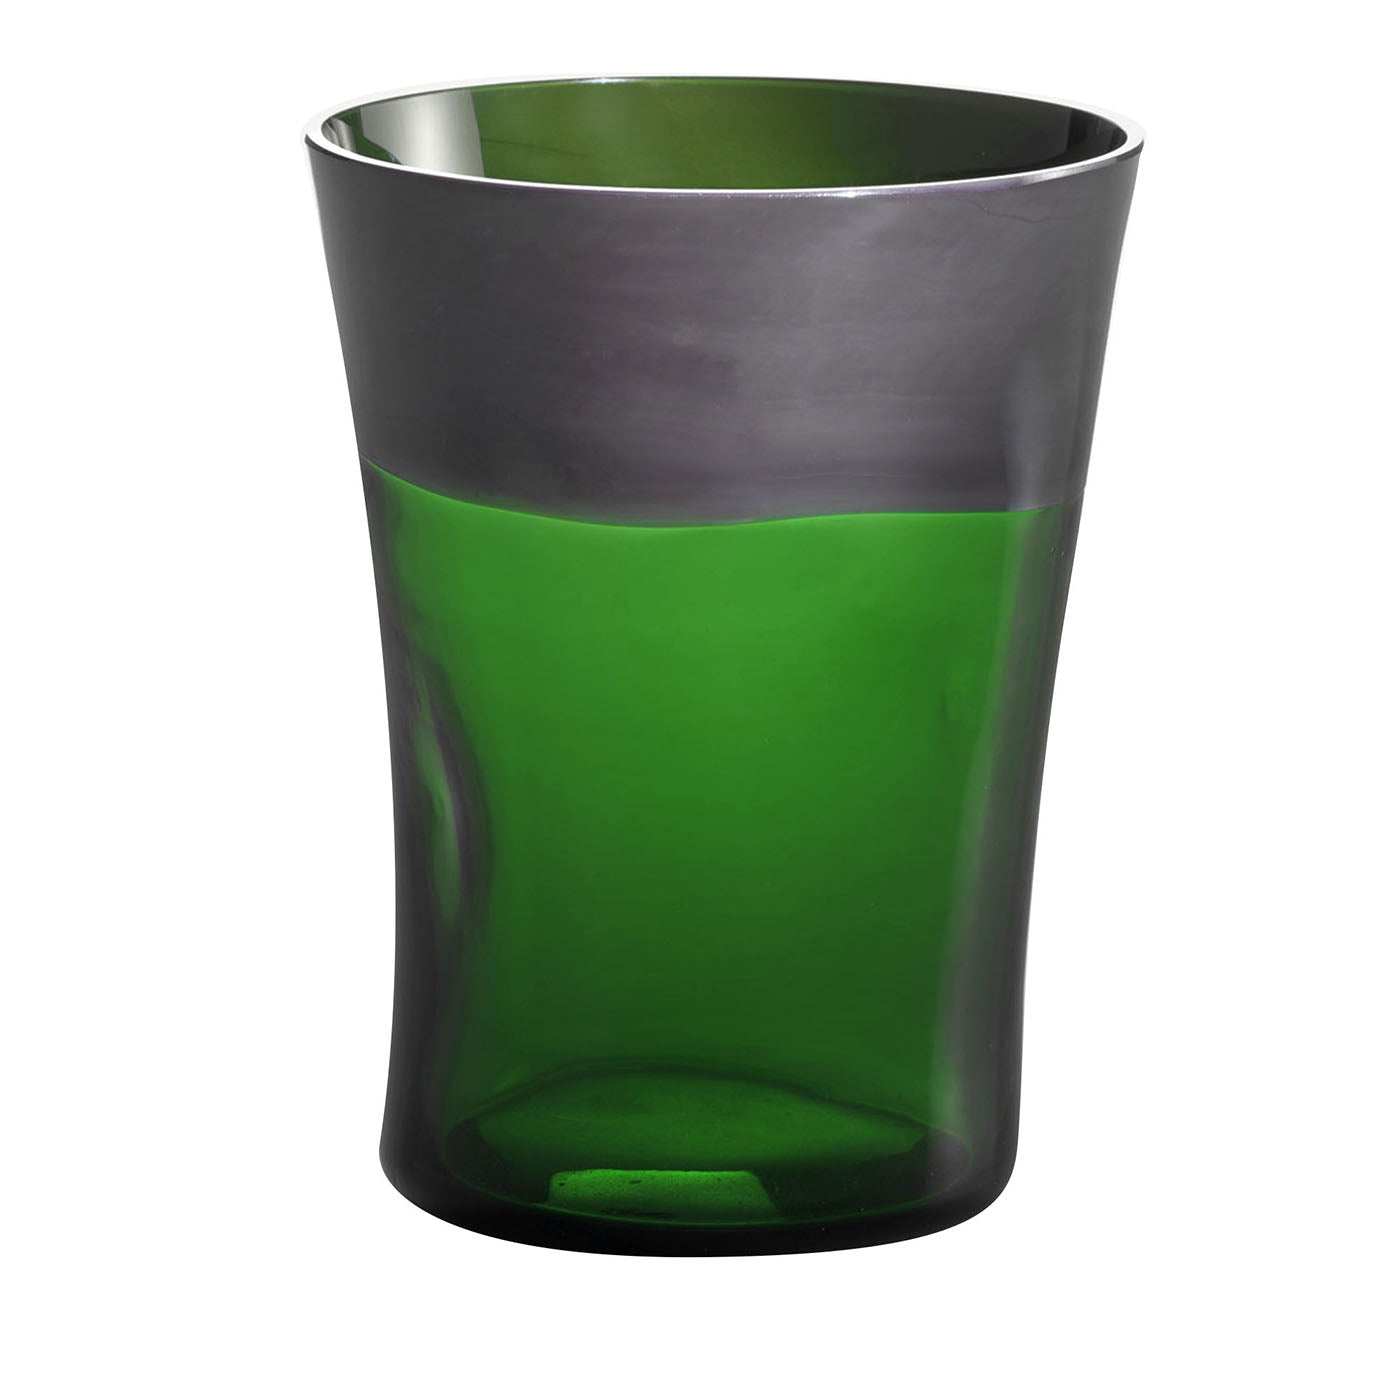 Dandy Gray & Green Glass by Stefano Marcato - Main view